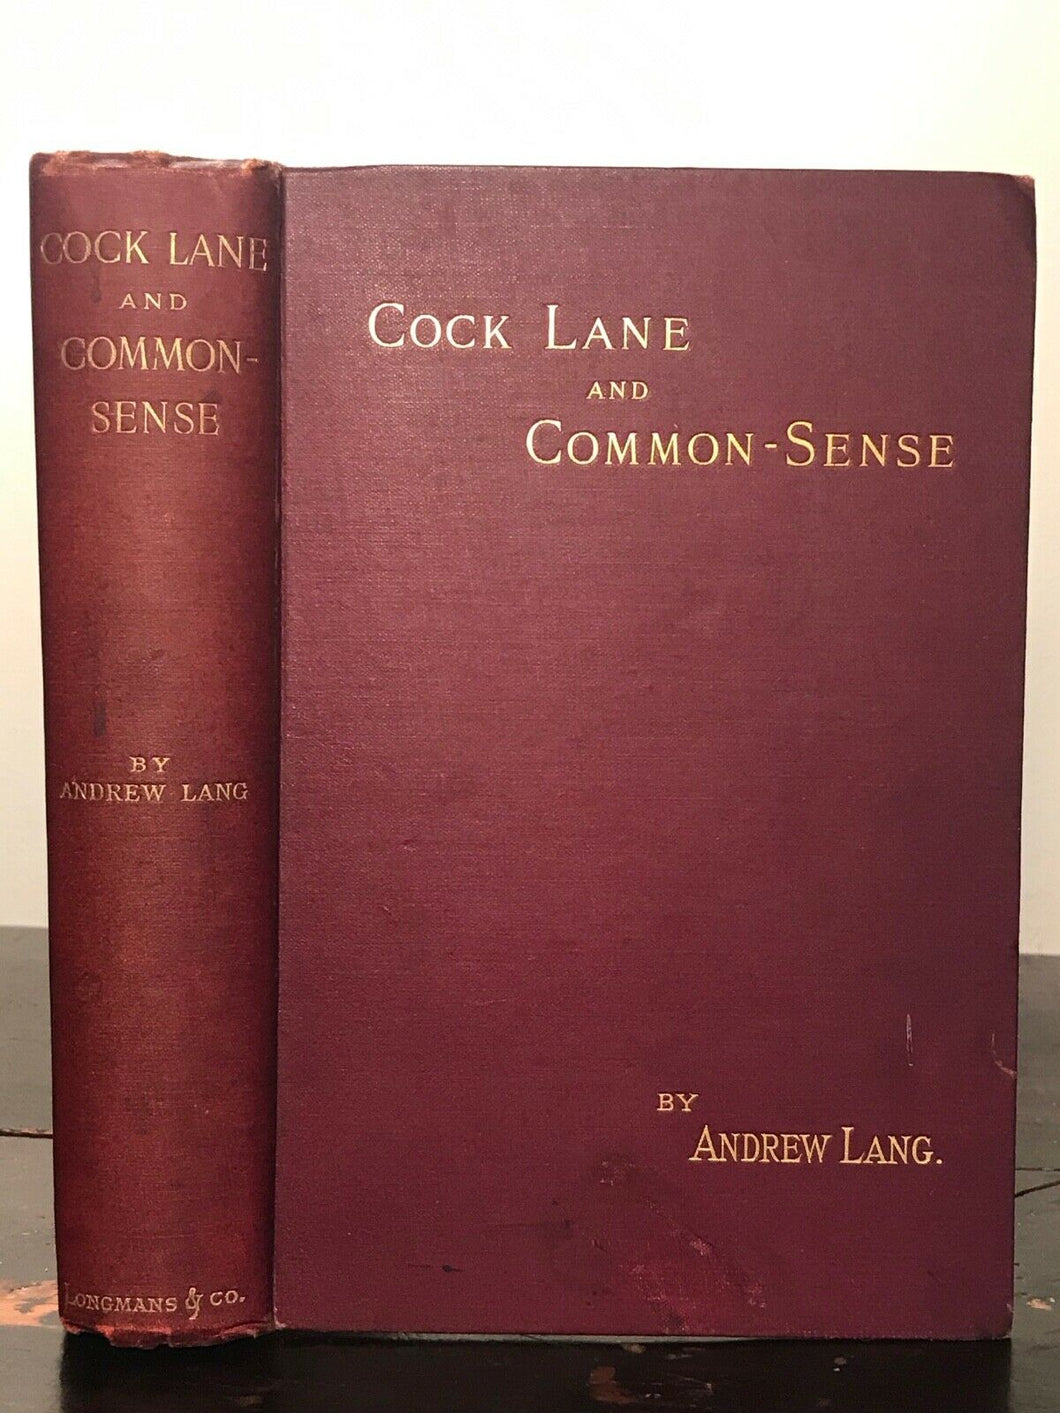 COCK LANE AND COMMON SENSE - Andrew Lang - 1st Ed, 1894 - GHOSTS PSYCHIC SPIRITS